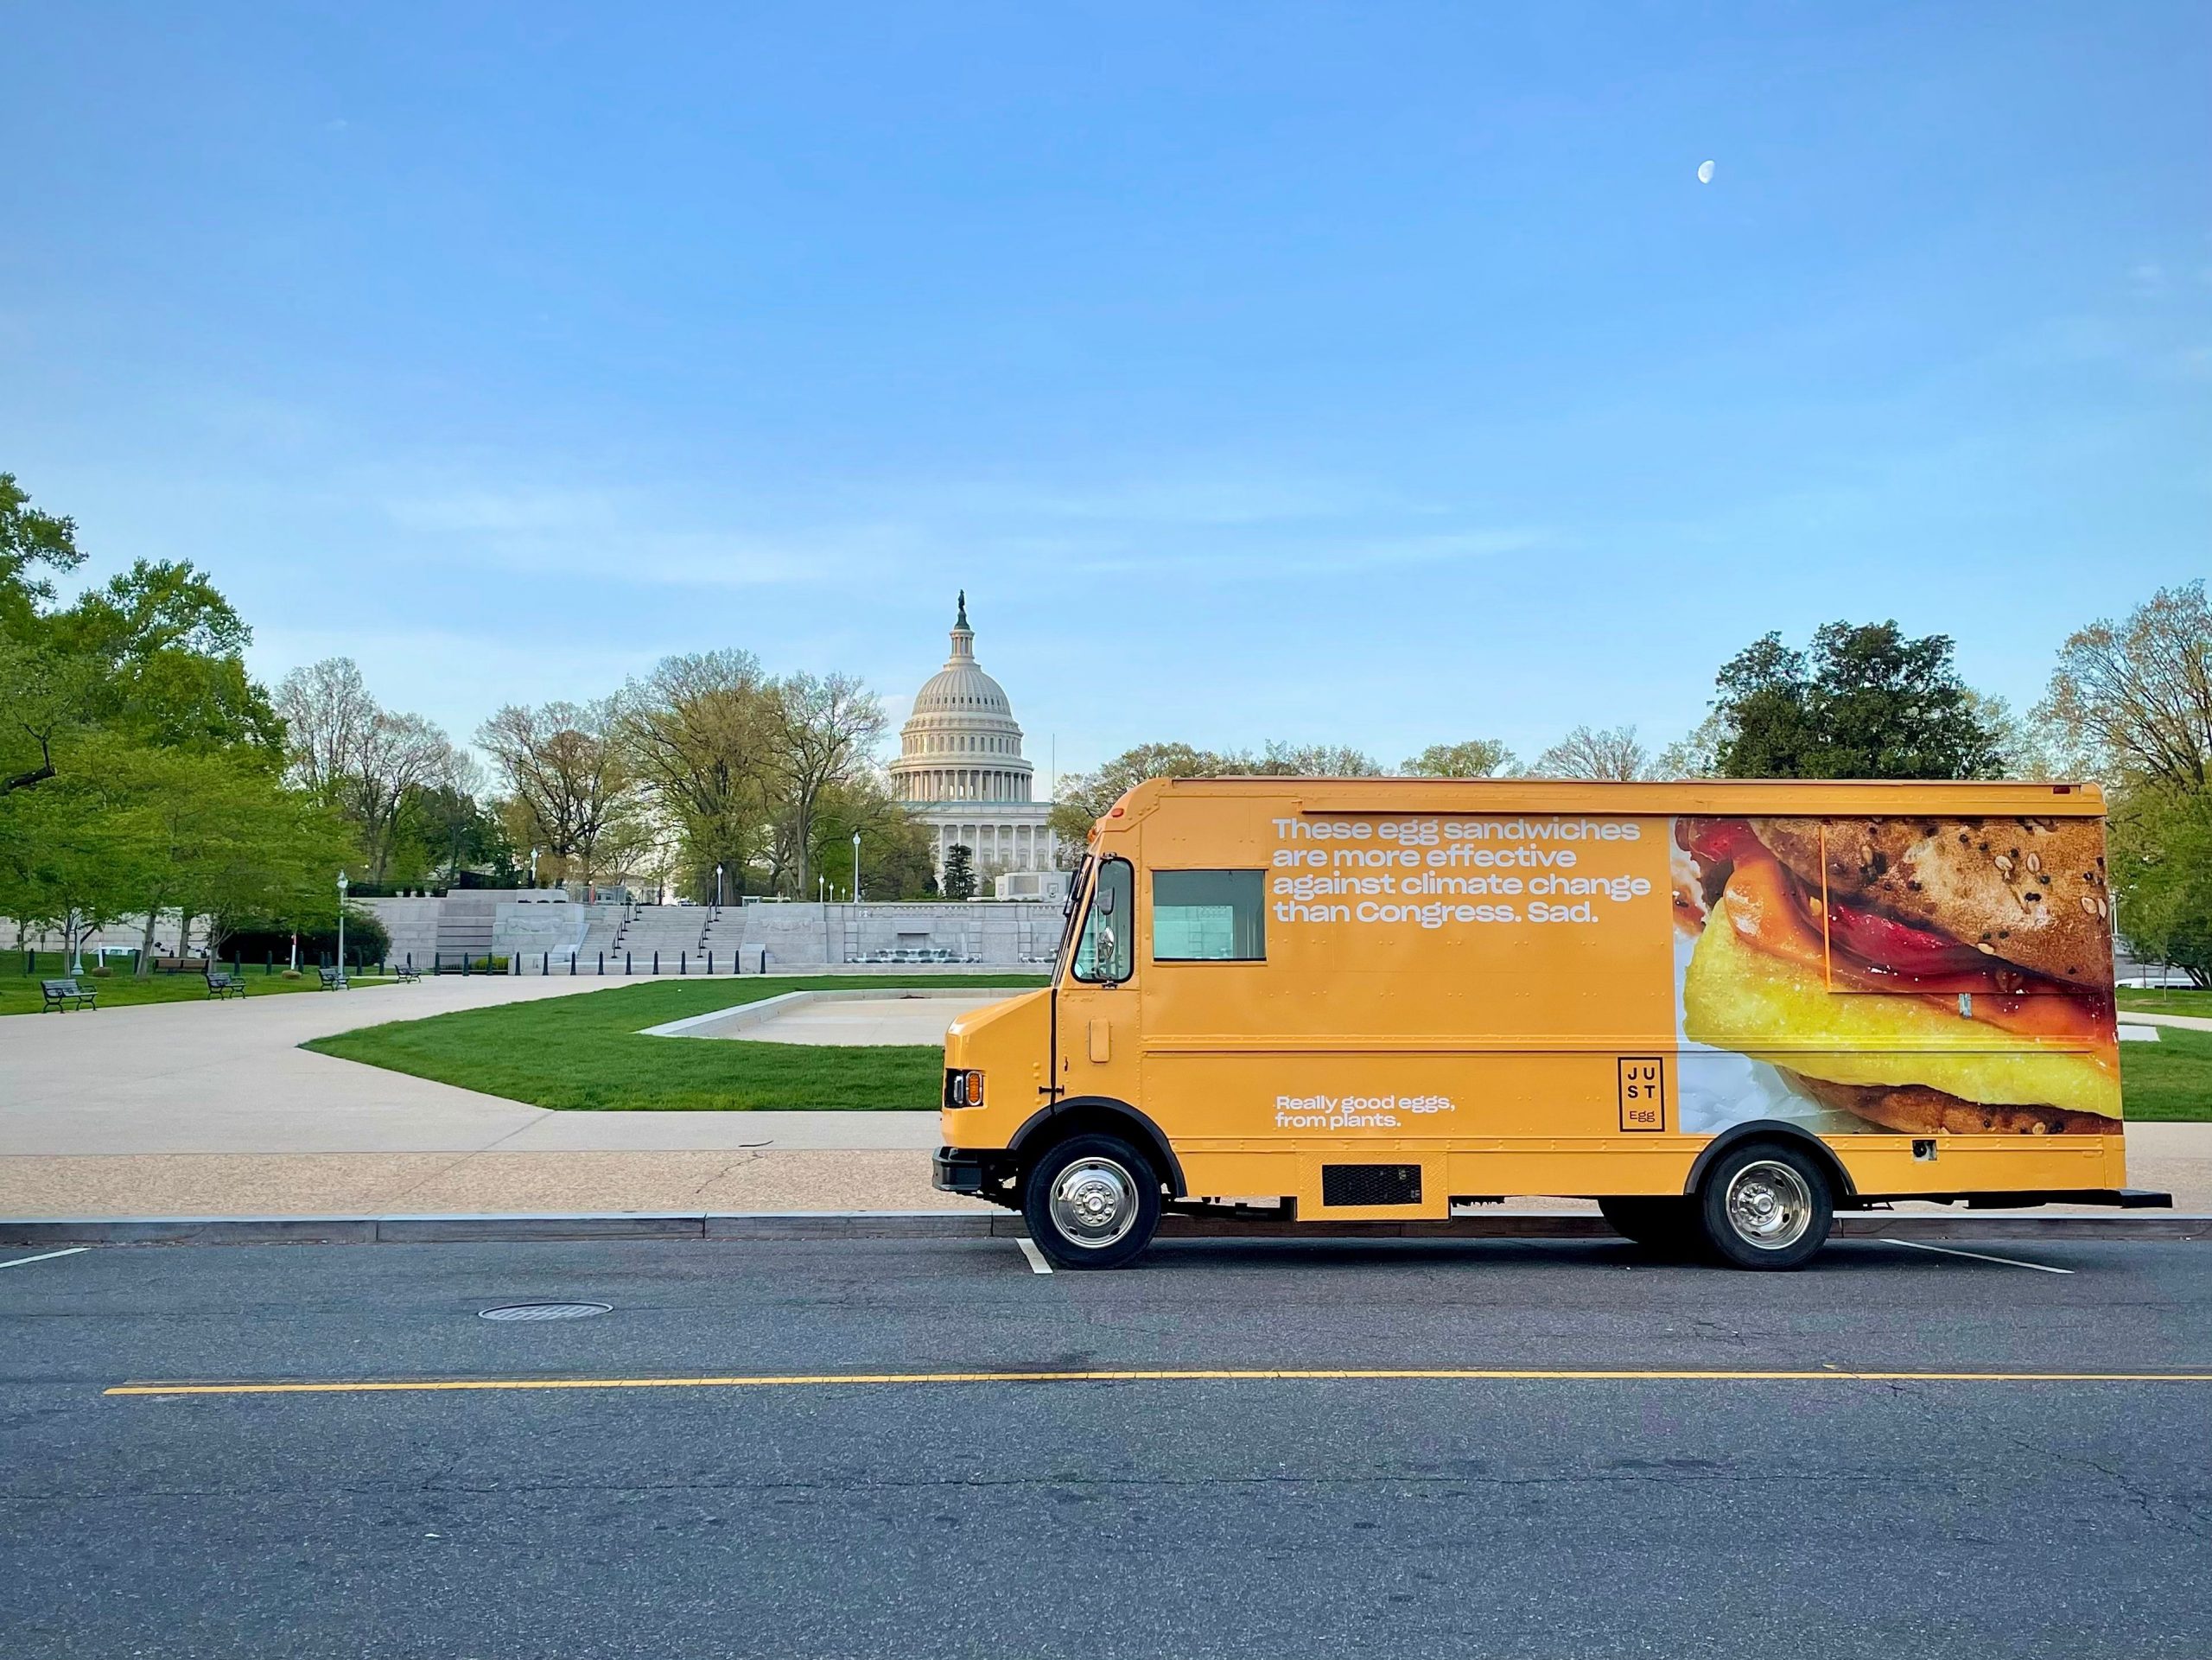 JUST Egg Branded Food Truck In Washington DC 